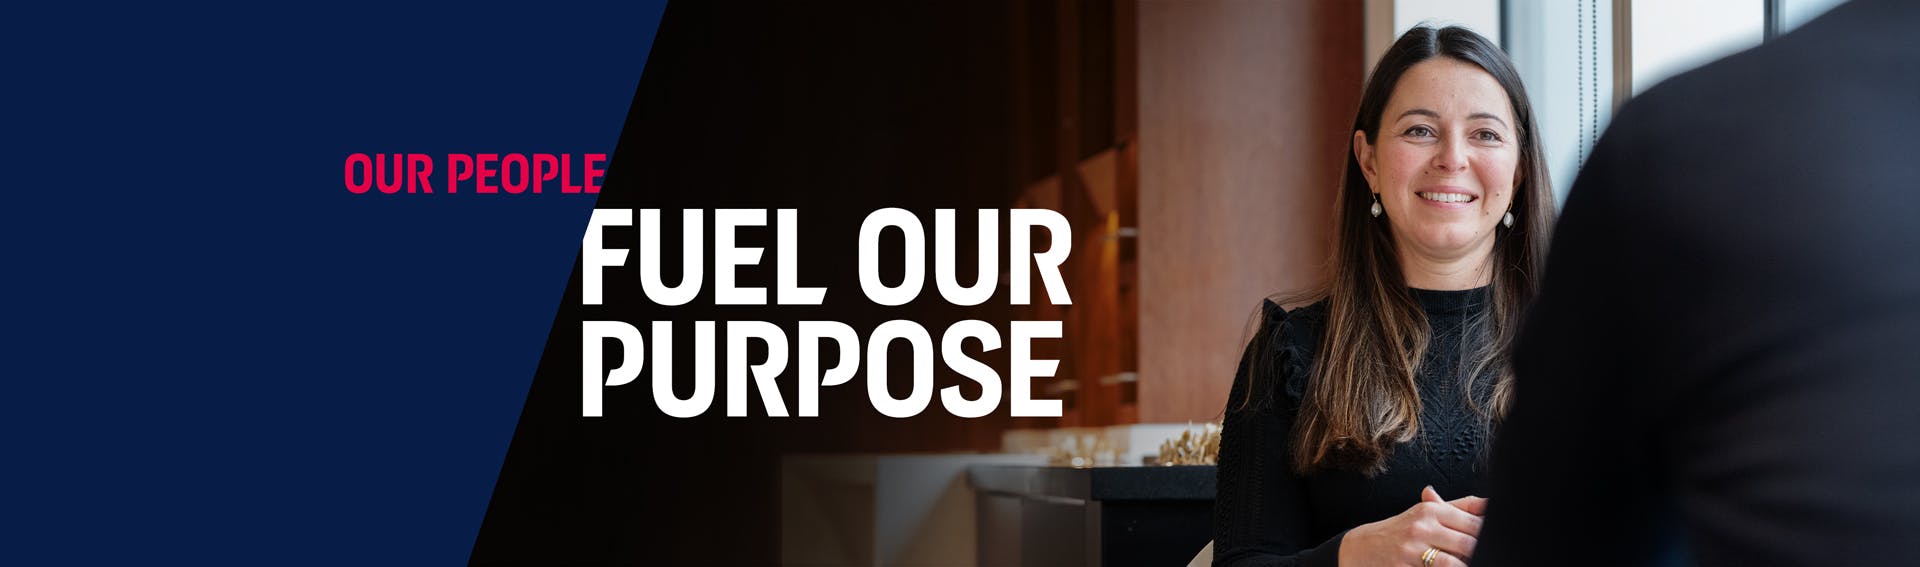 Our people fuel our purpose